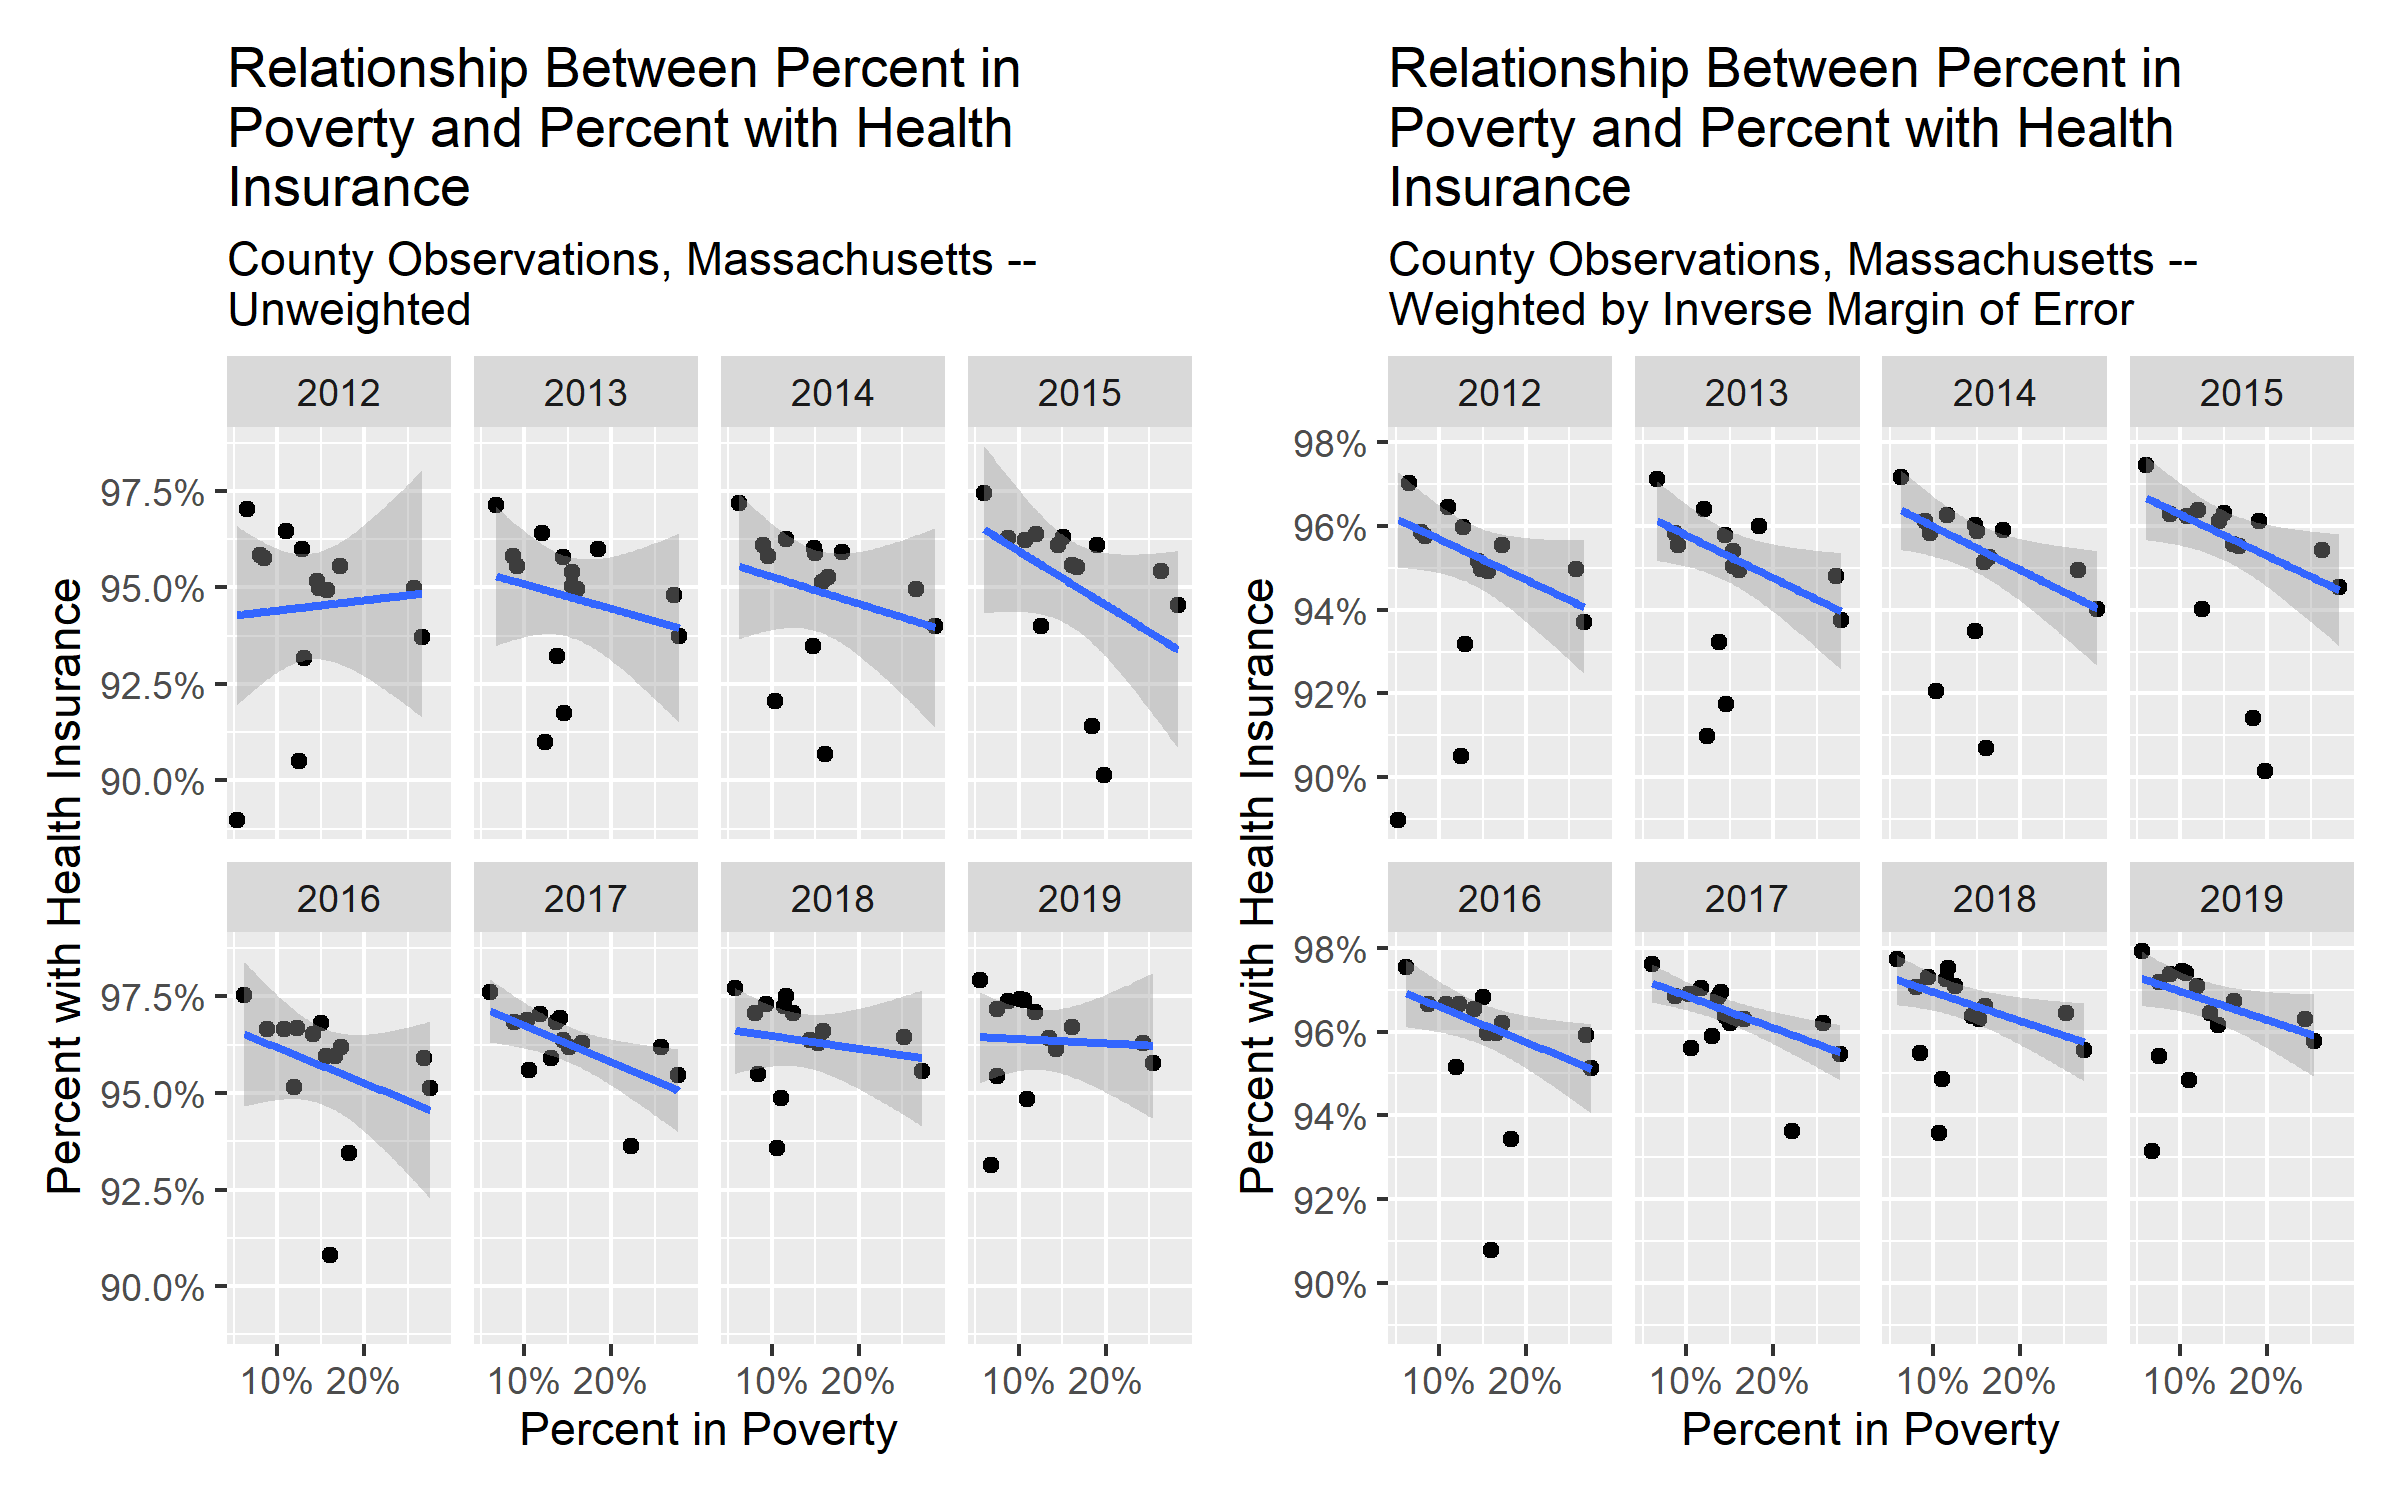 County observations of adult (age 19-64) health insurance rates in California